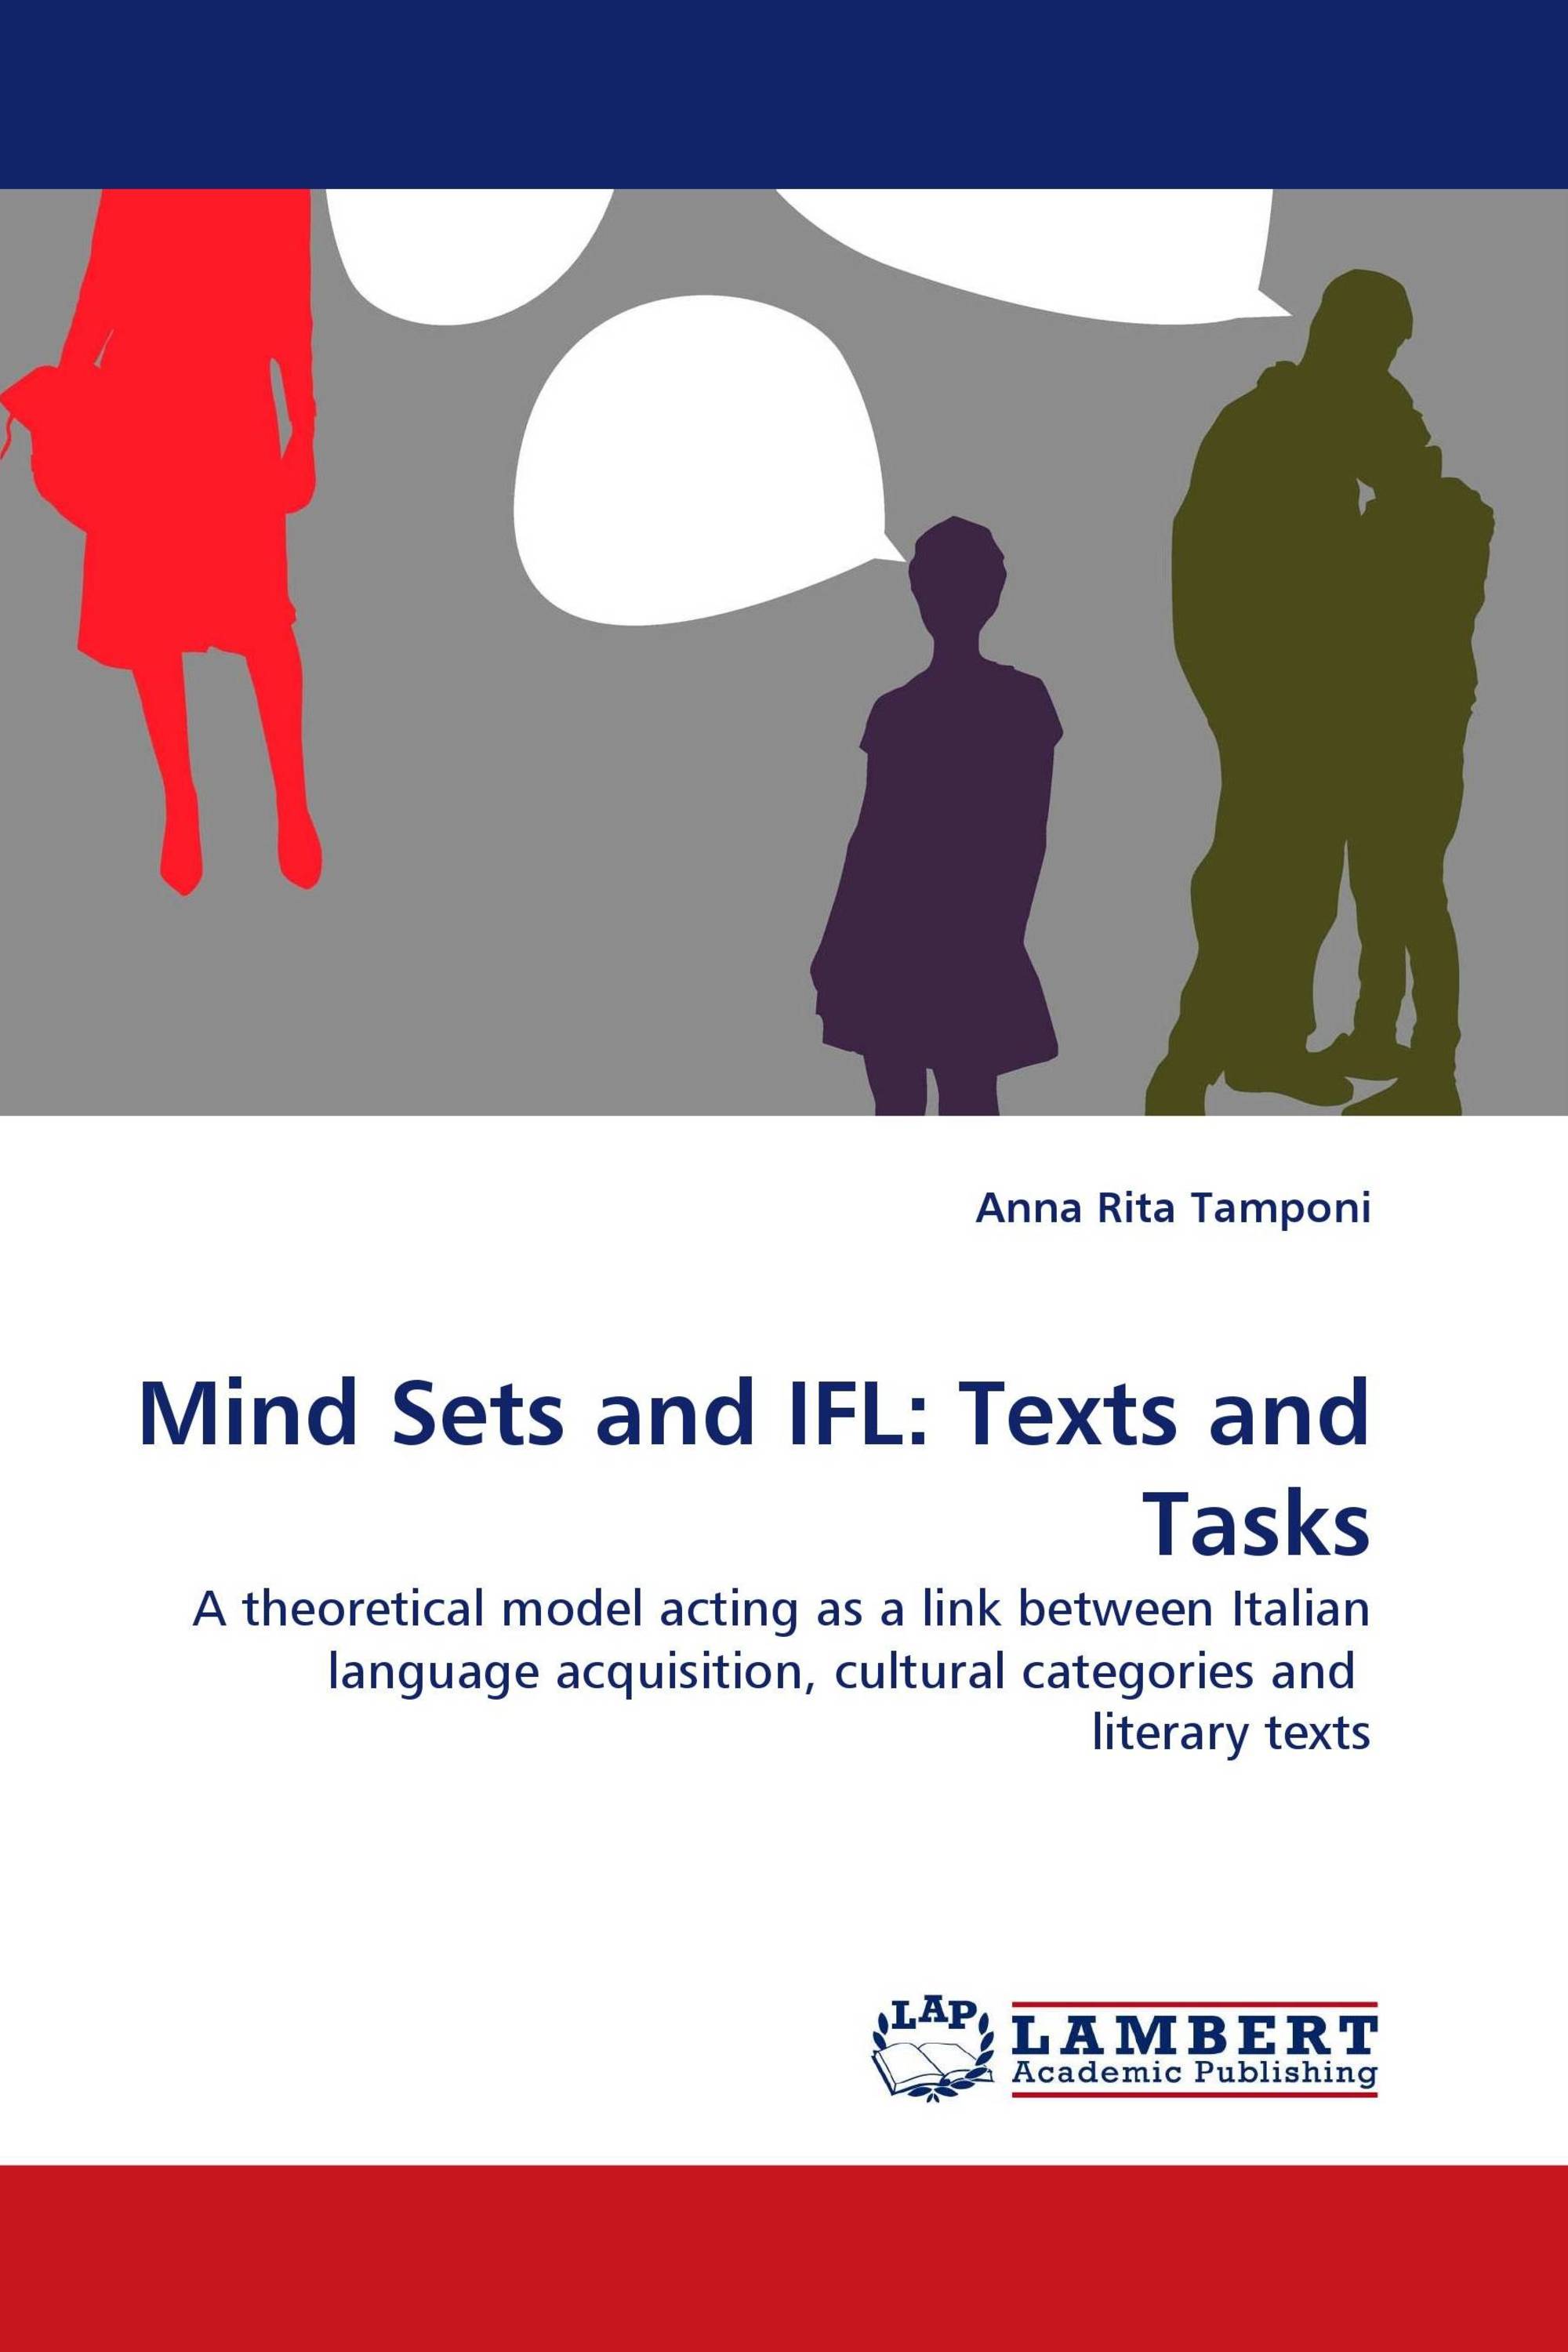 Mind Sets and IFL: Texts and Tasks